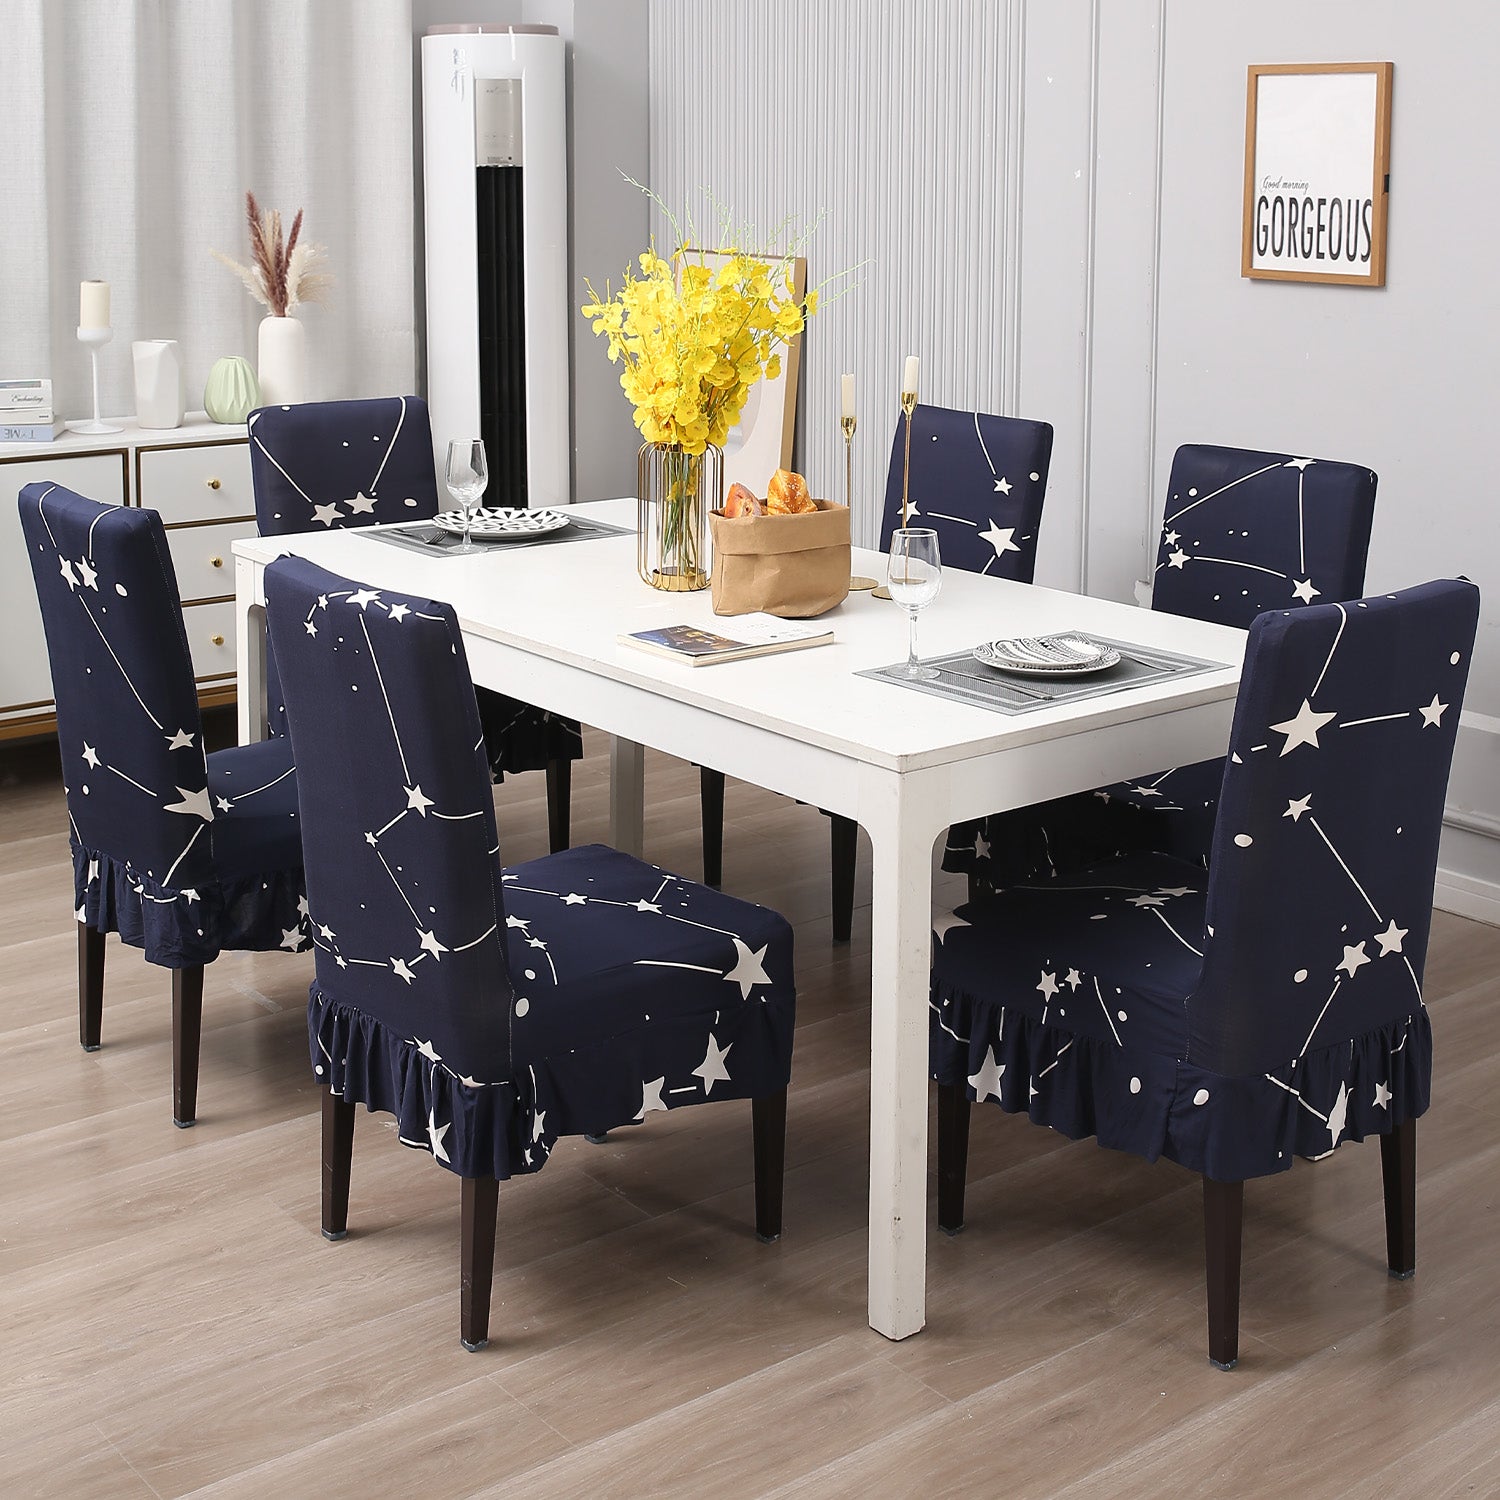 Elastic Stretchable Dining Chair Cover with Frill, Midnight Blue Star